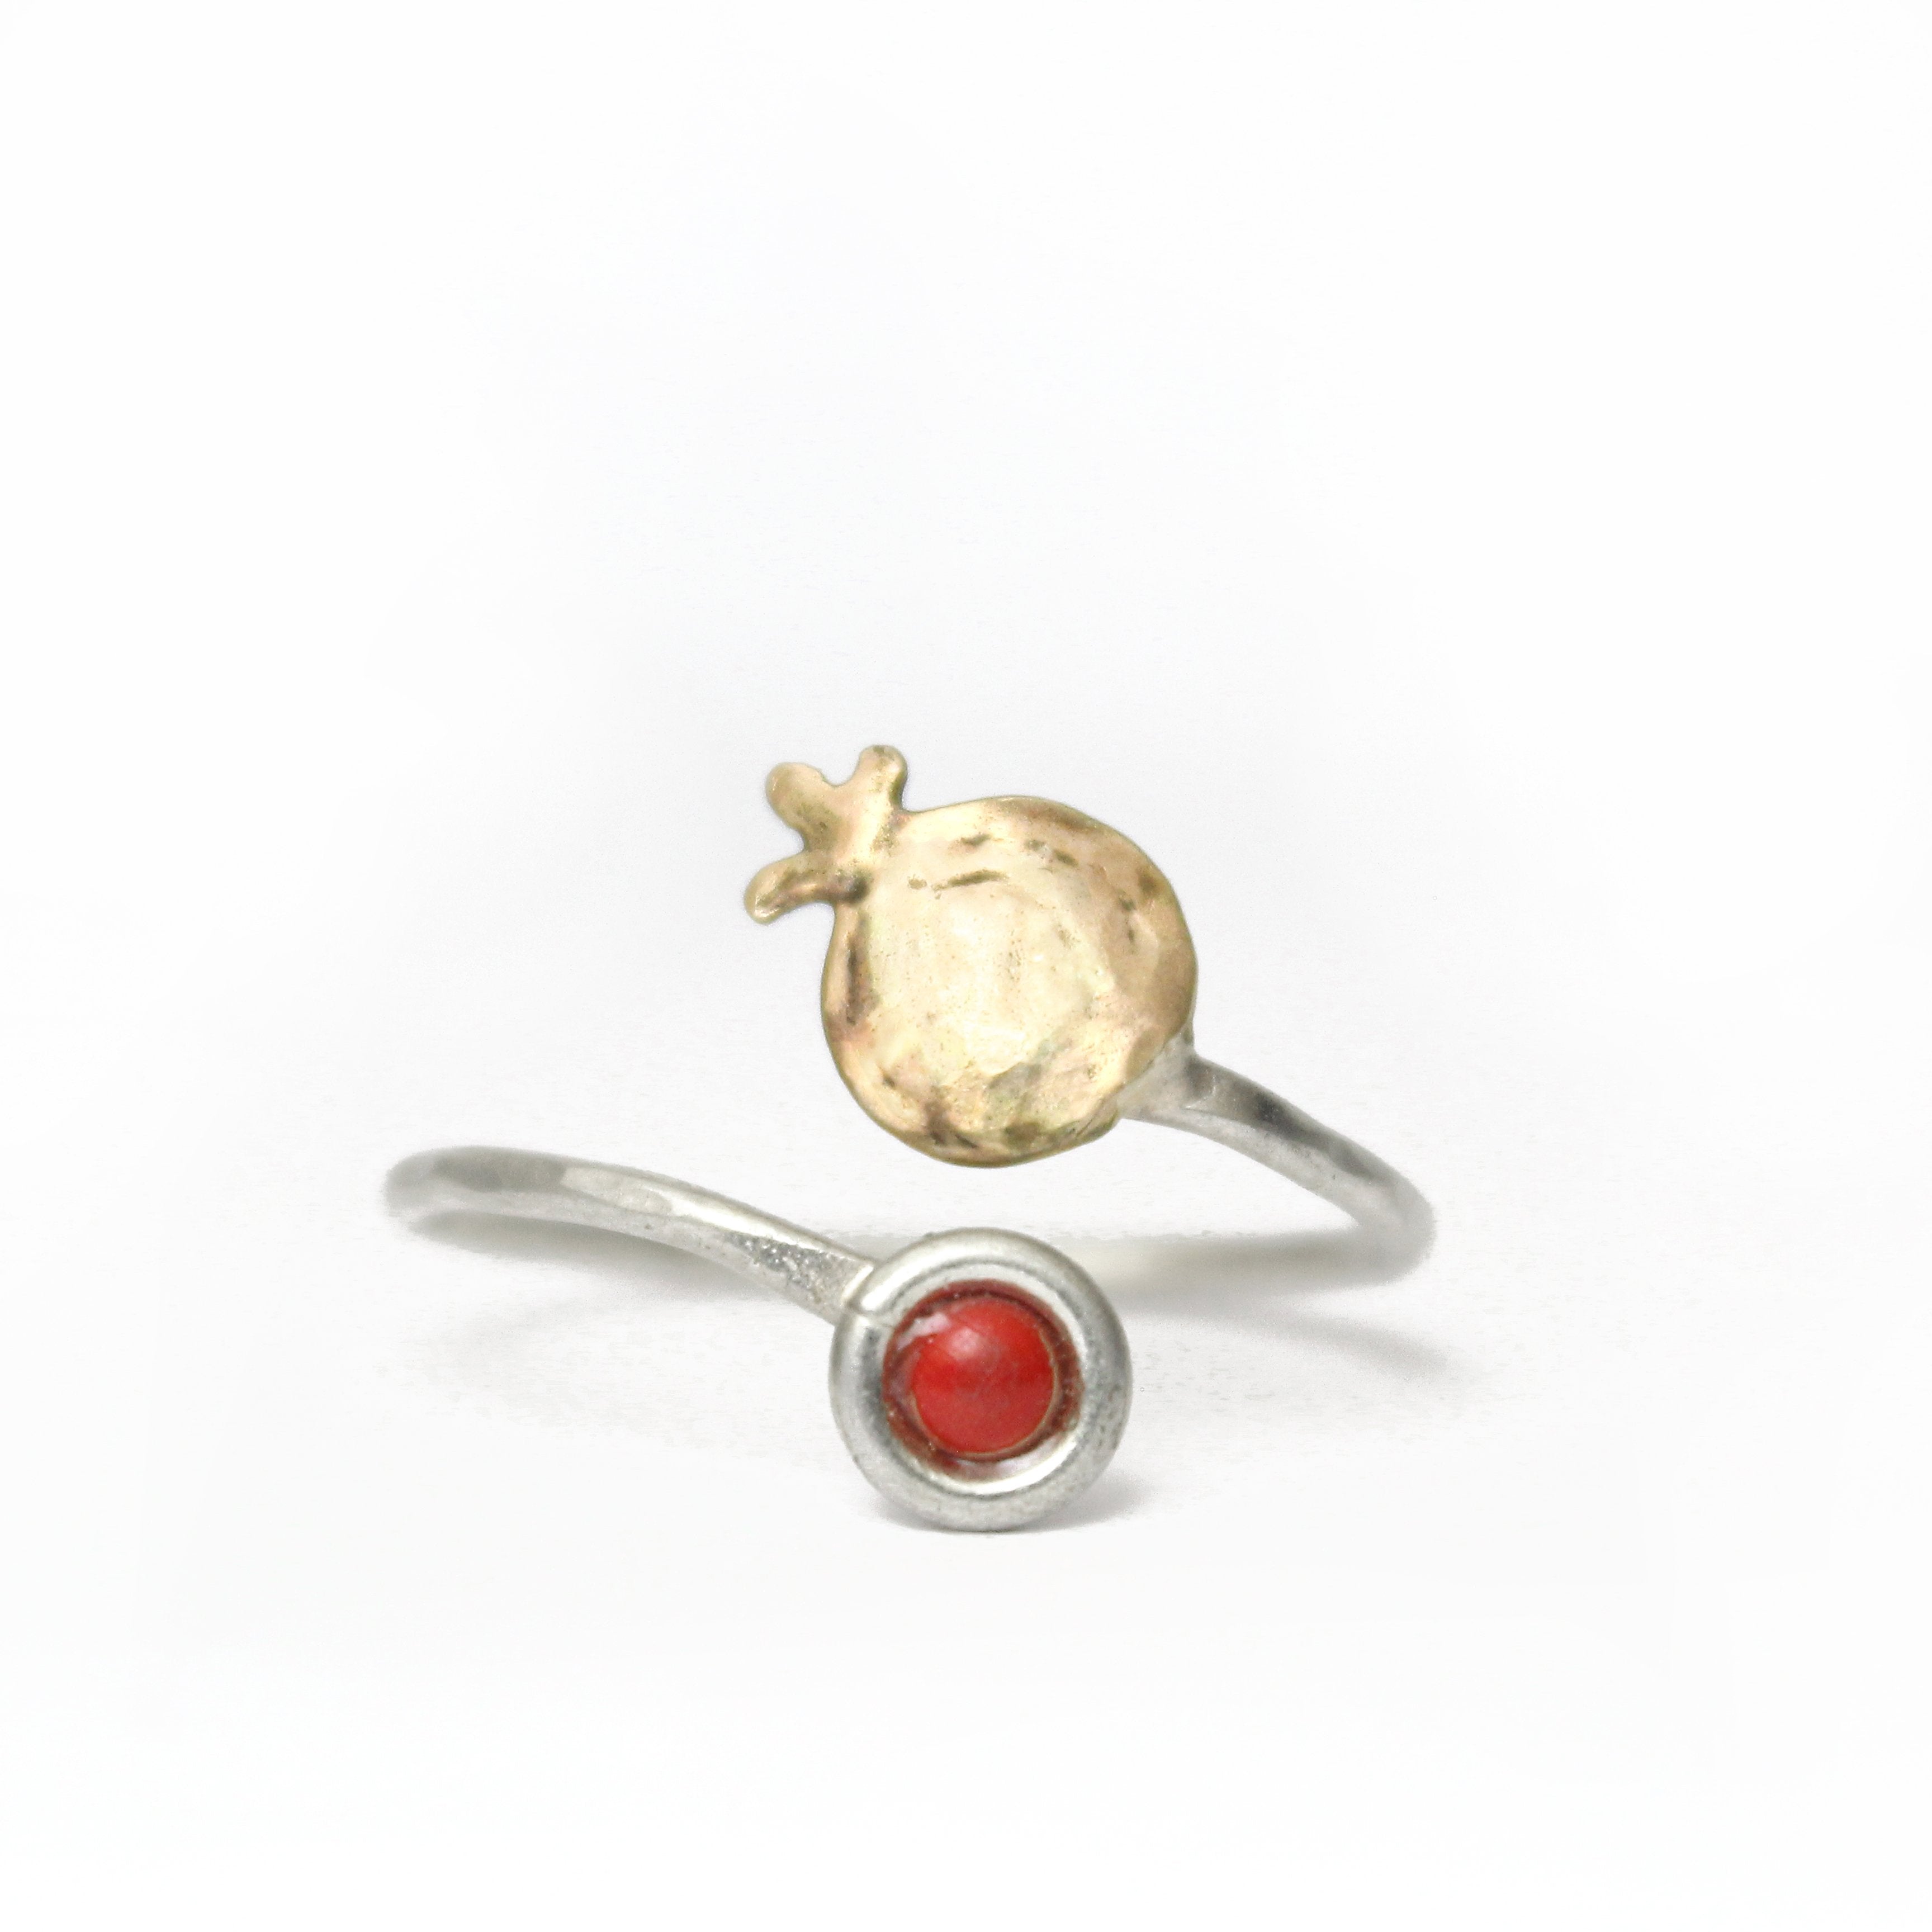 Pomegranate Silver & Gold Ring with Gemstone - Shulamit Kanter